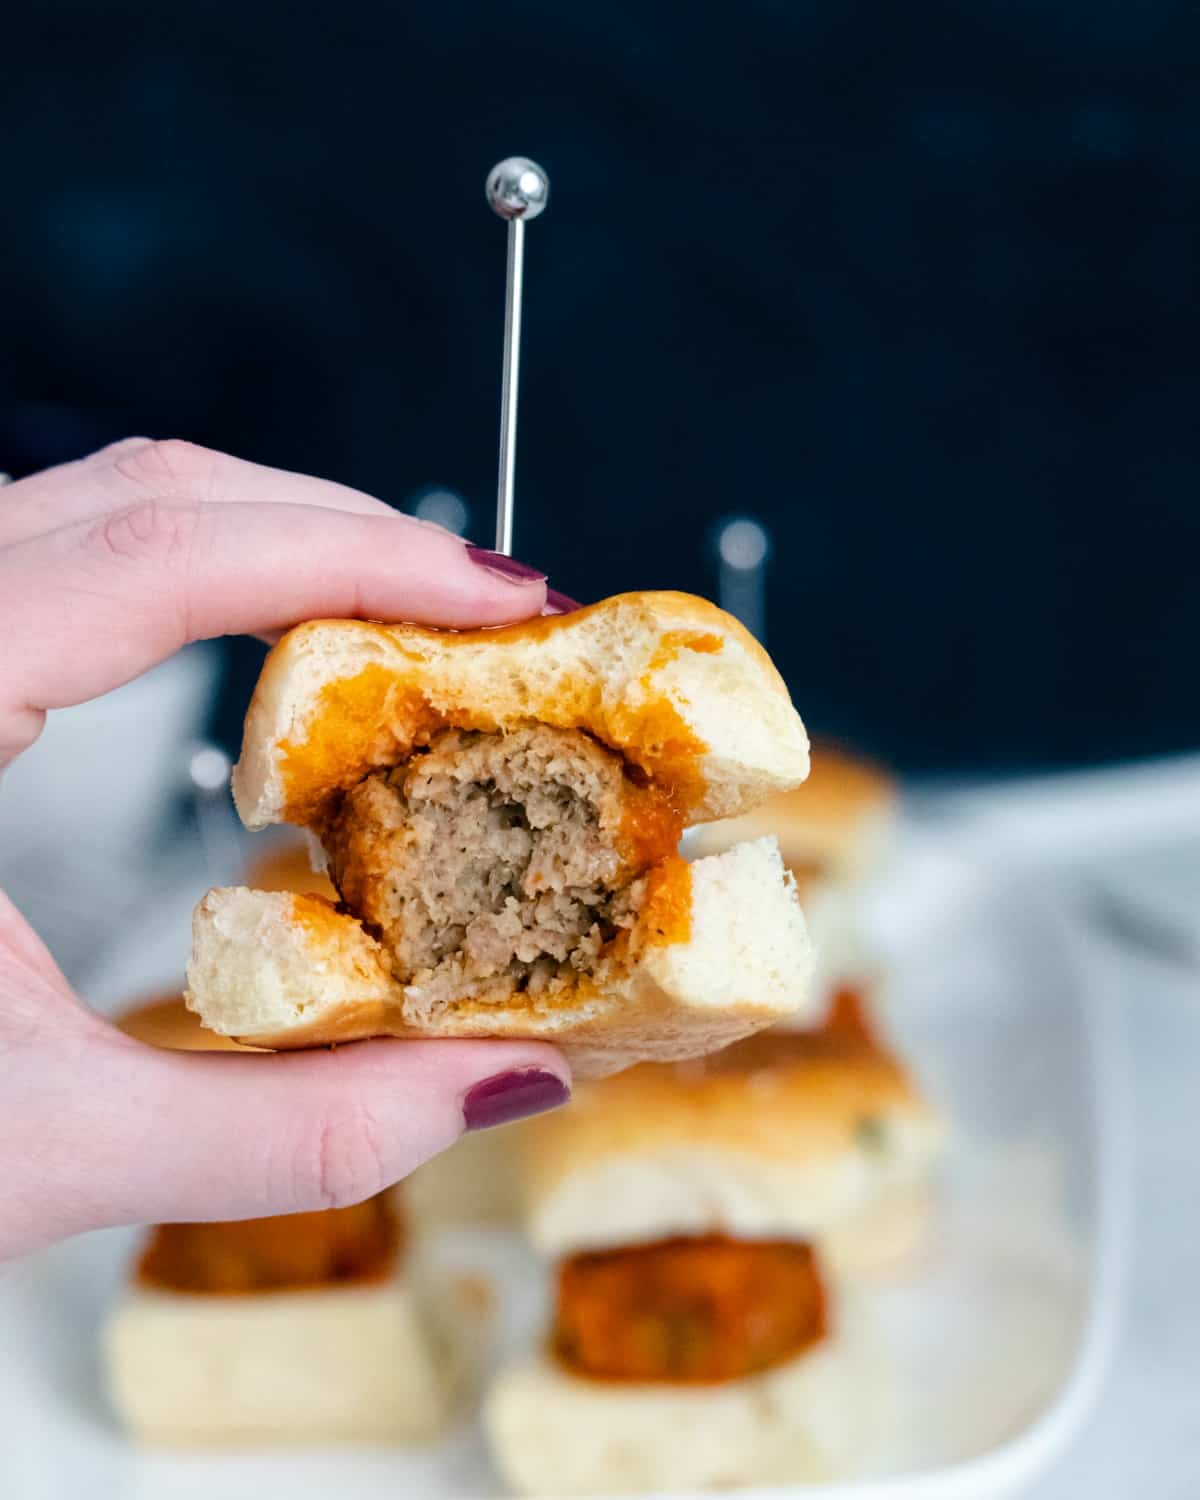 Meatball slider with bite taken out.